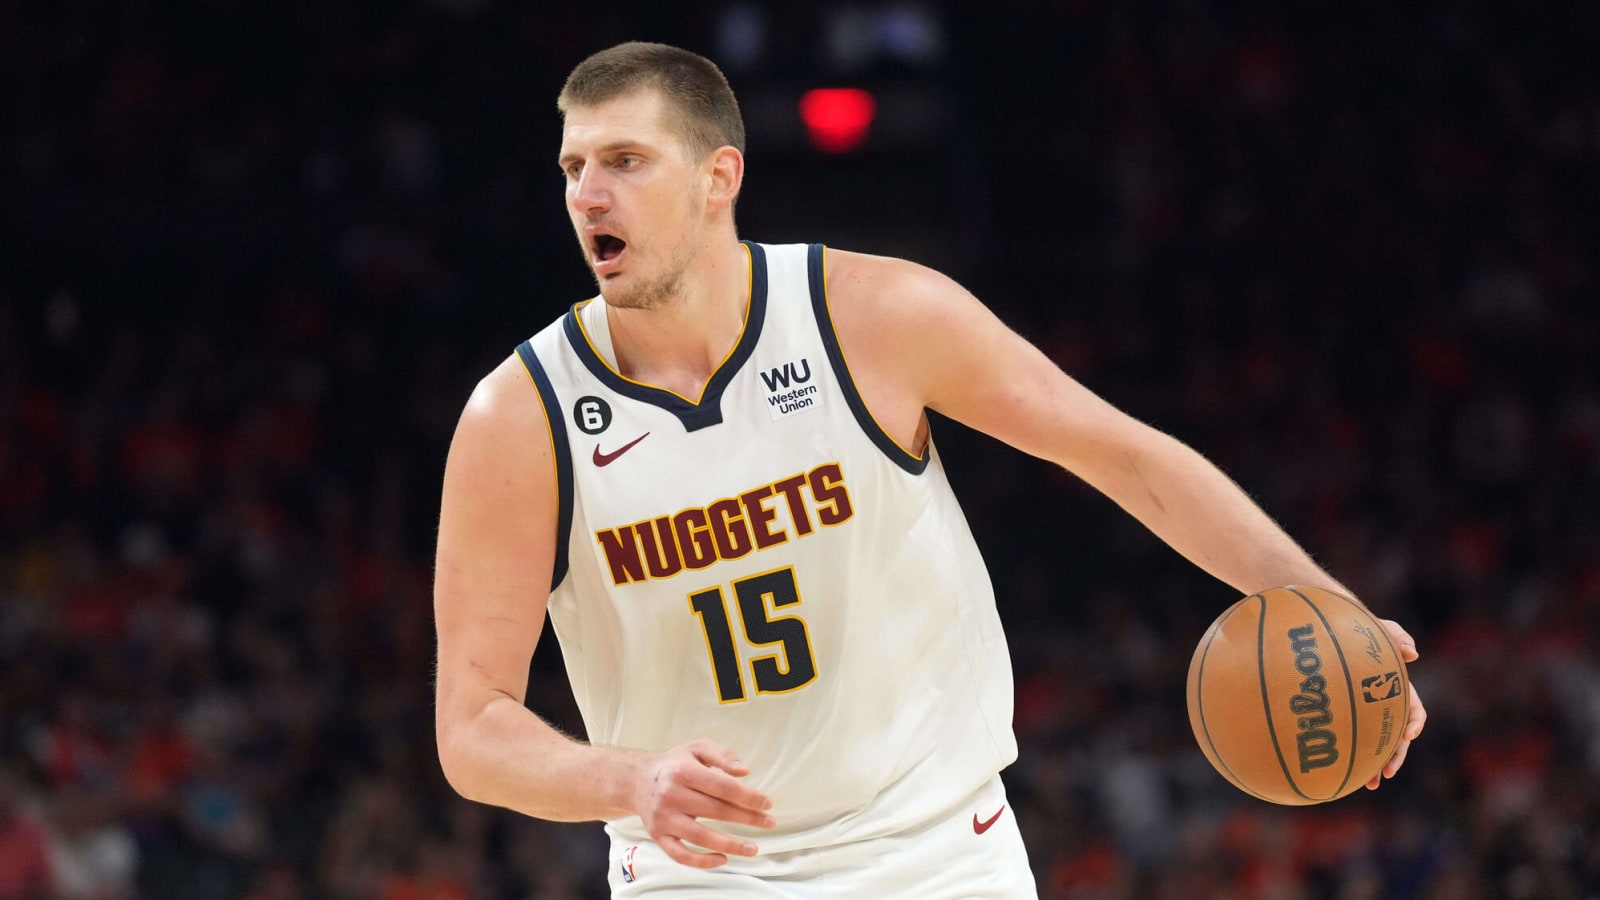 Nikola Jokic has funny response to question about facing Lakers